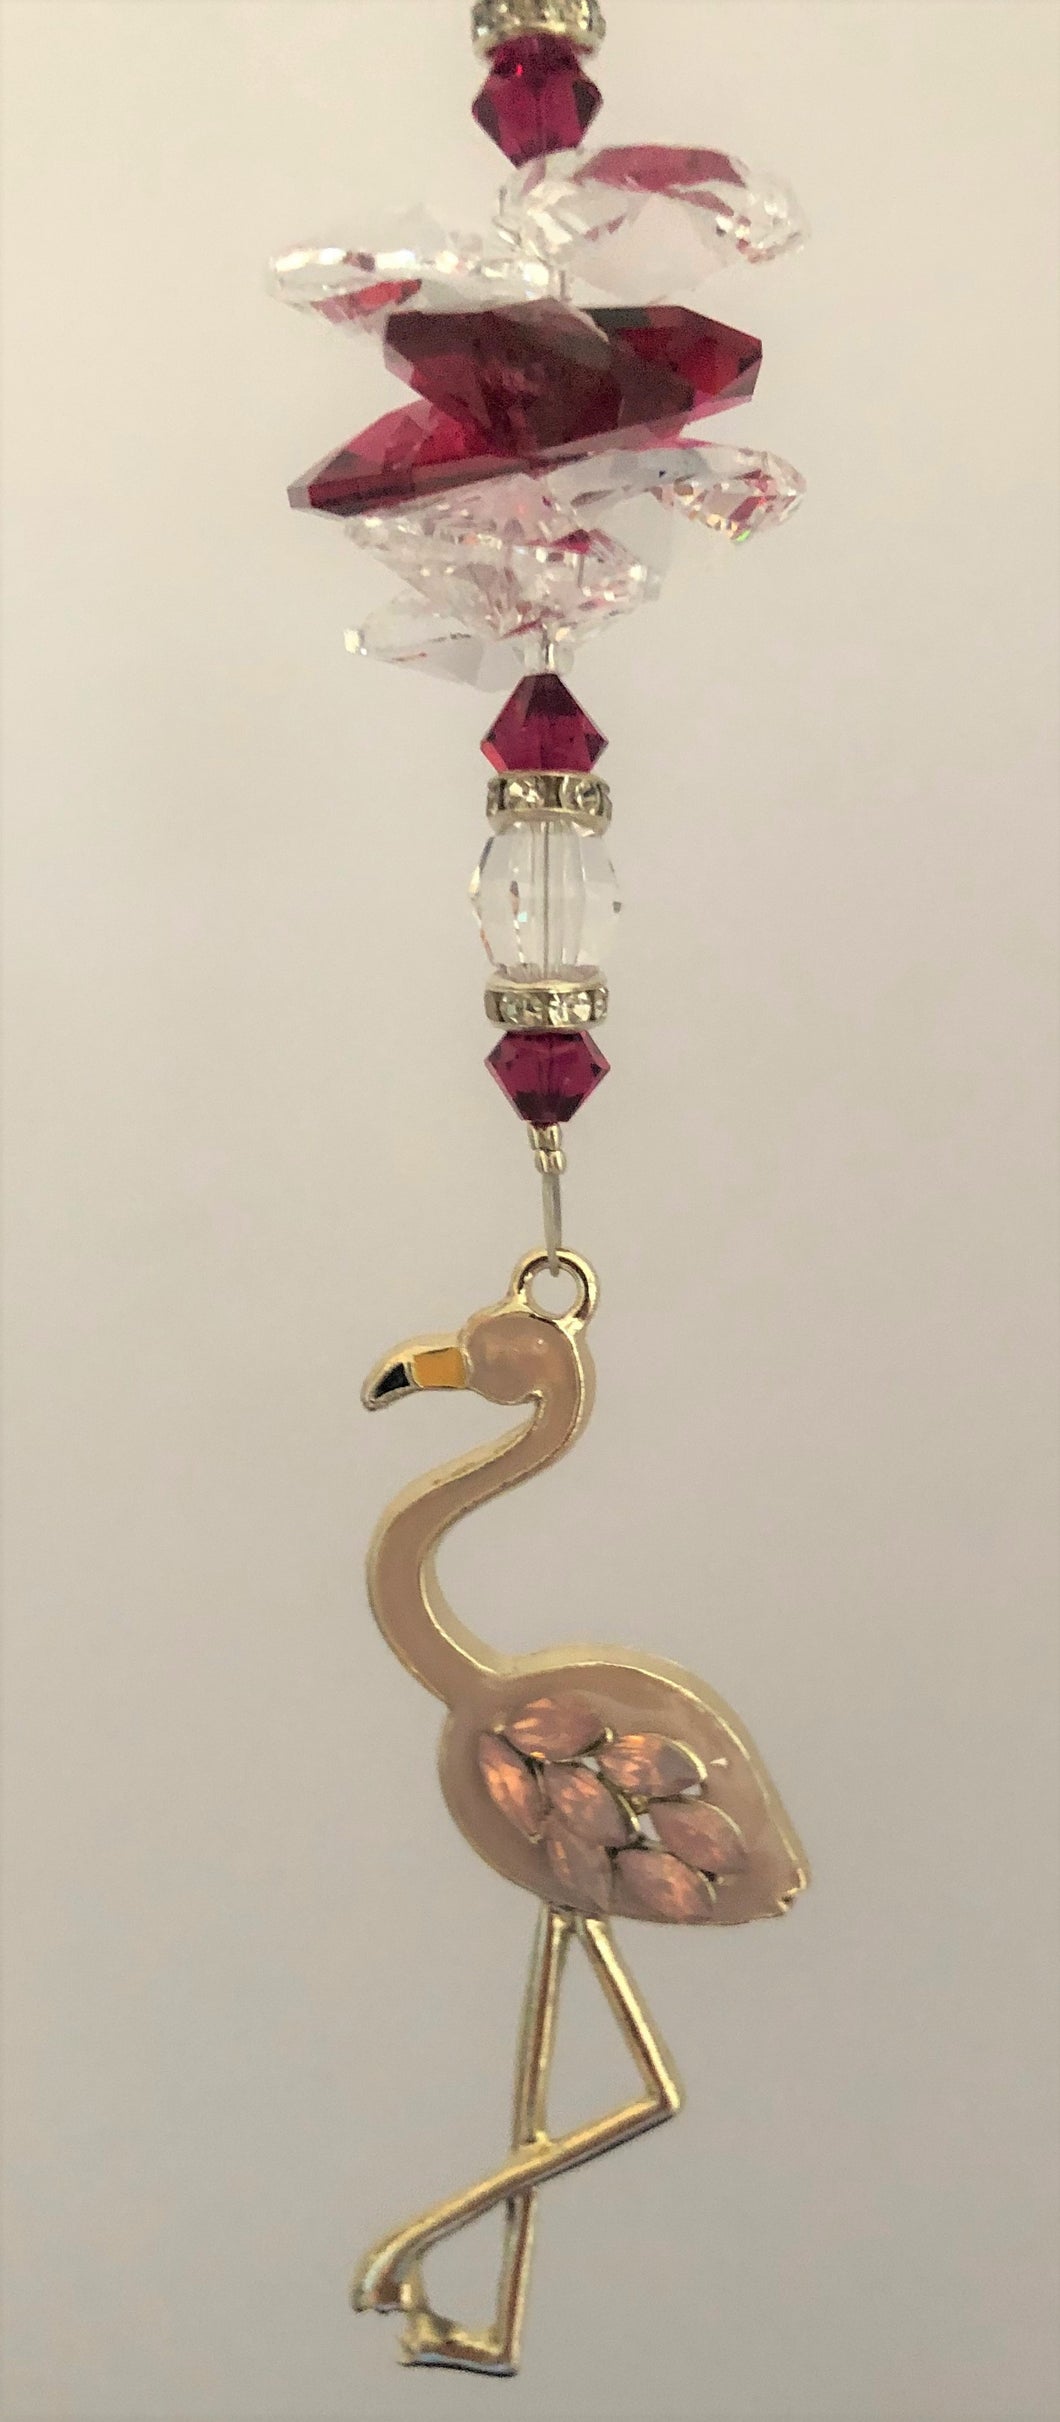 This beautiful Pale pink Flamingo suncatcher which is decorated with crystals and Garnet